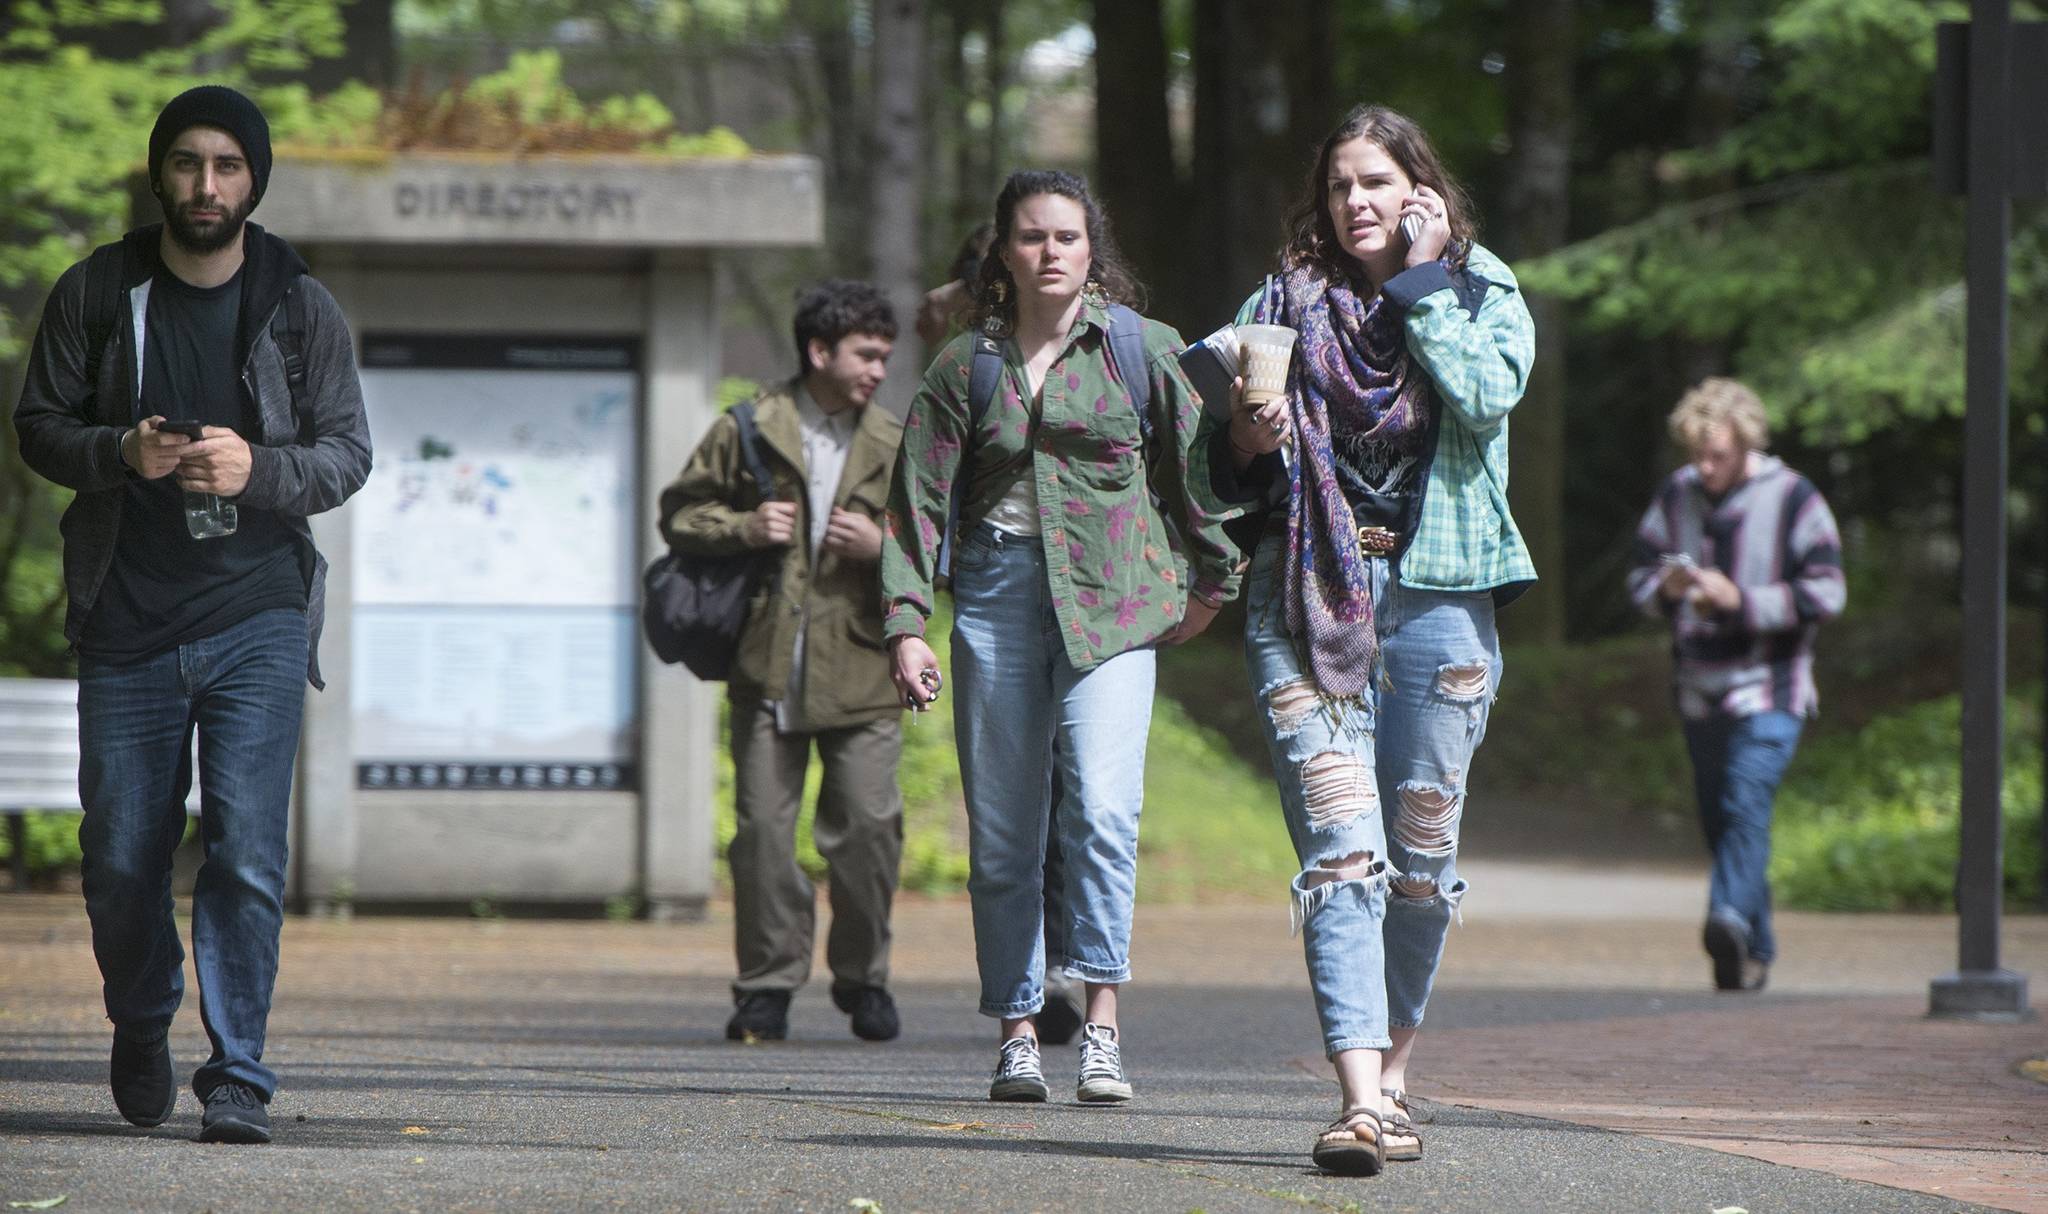 Tony Overman/The Olympian via AP                                Students leave The Evergreen State College campus in Olympia after a threat prompted a student alert and evacuation Thursday. The announcement posted on the school’s website Thursday asked everyone to leave the Olympia campus or return to residence halls for further instructions. The post did not provide other details.